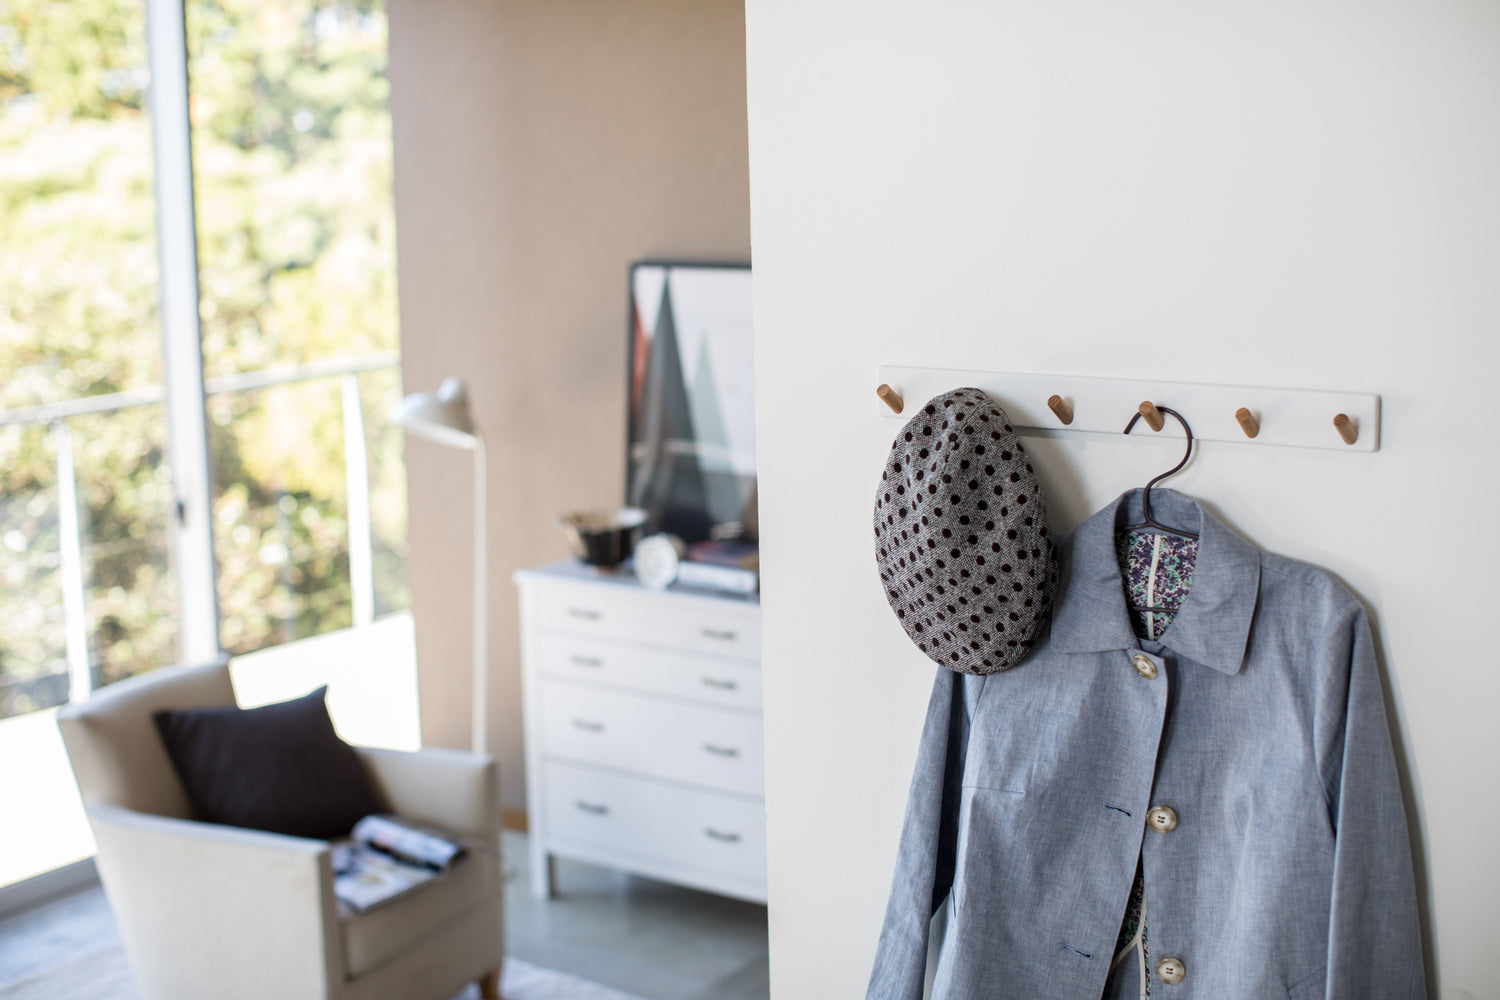 View 3 - White Wall-Mounted Coat Hanger holding hat and jacket by Yamazaki Home.